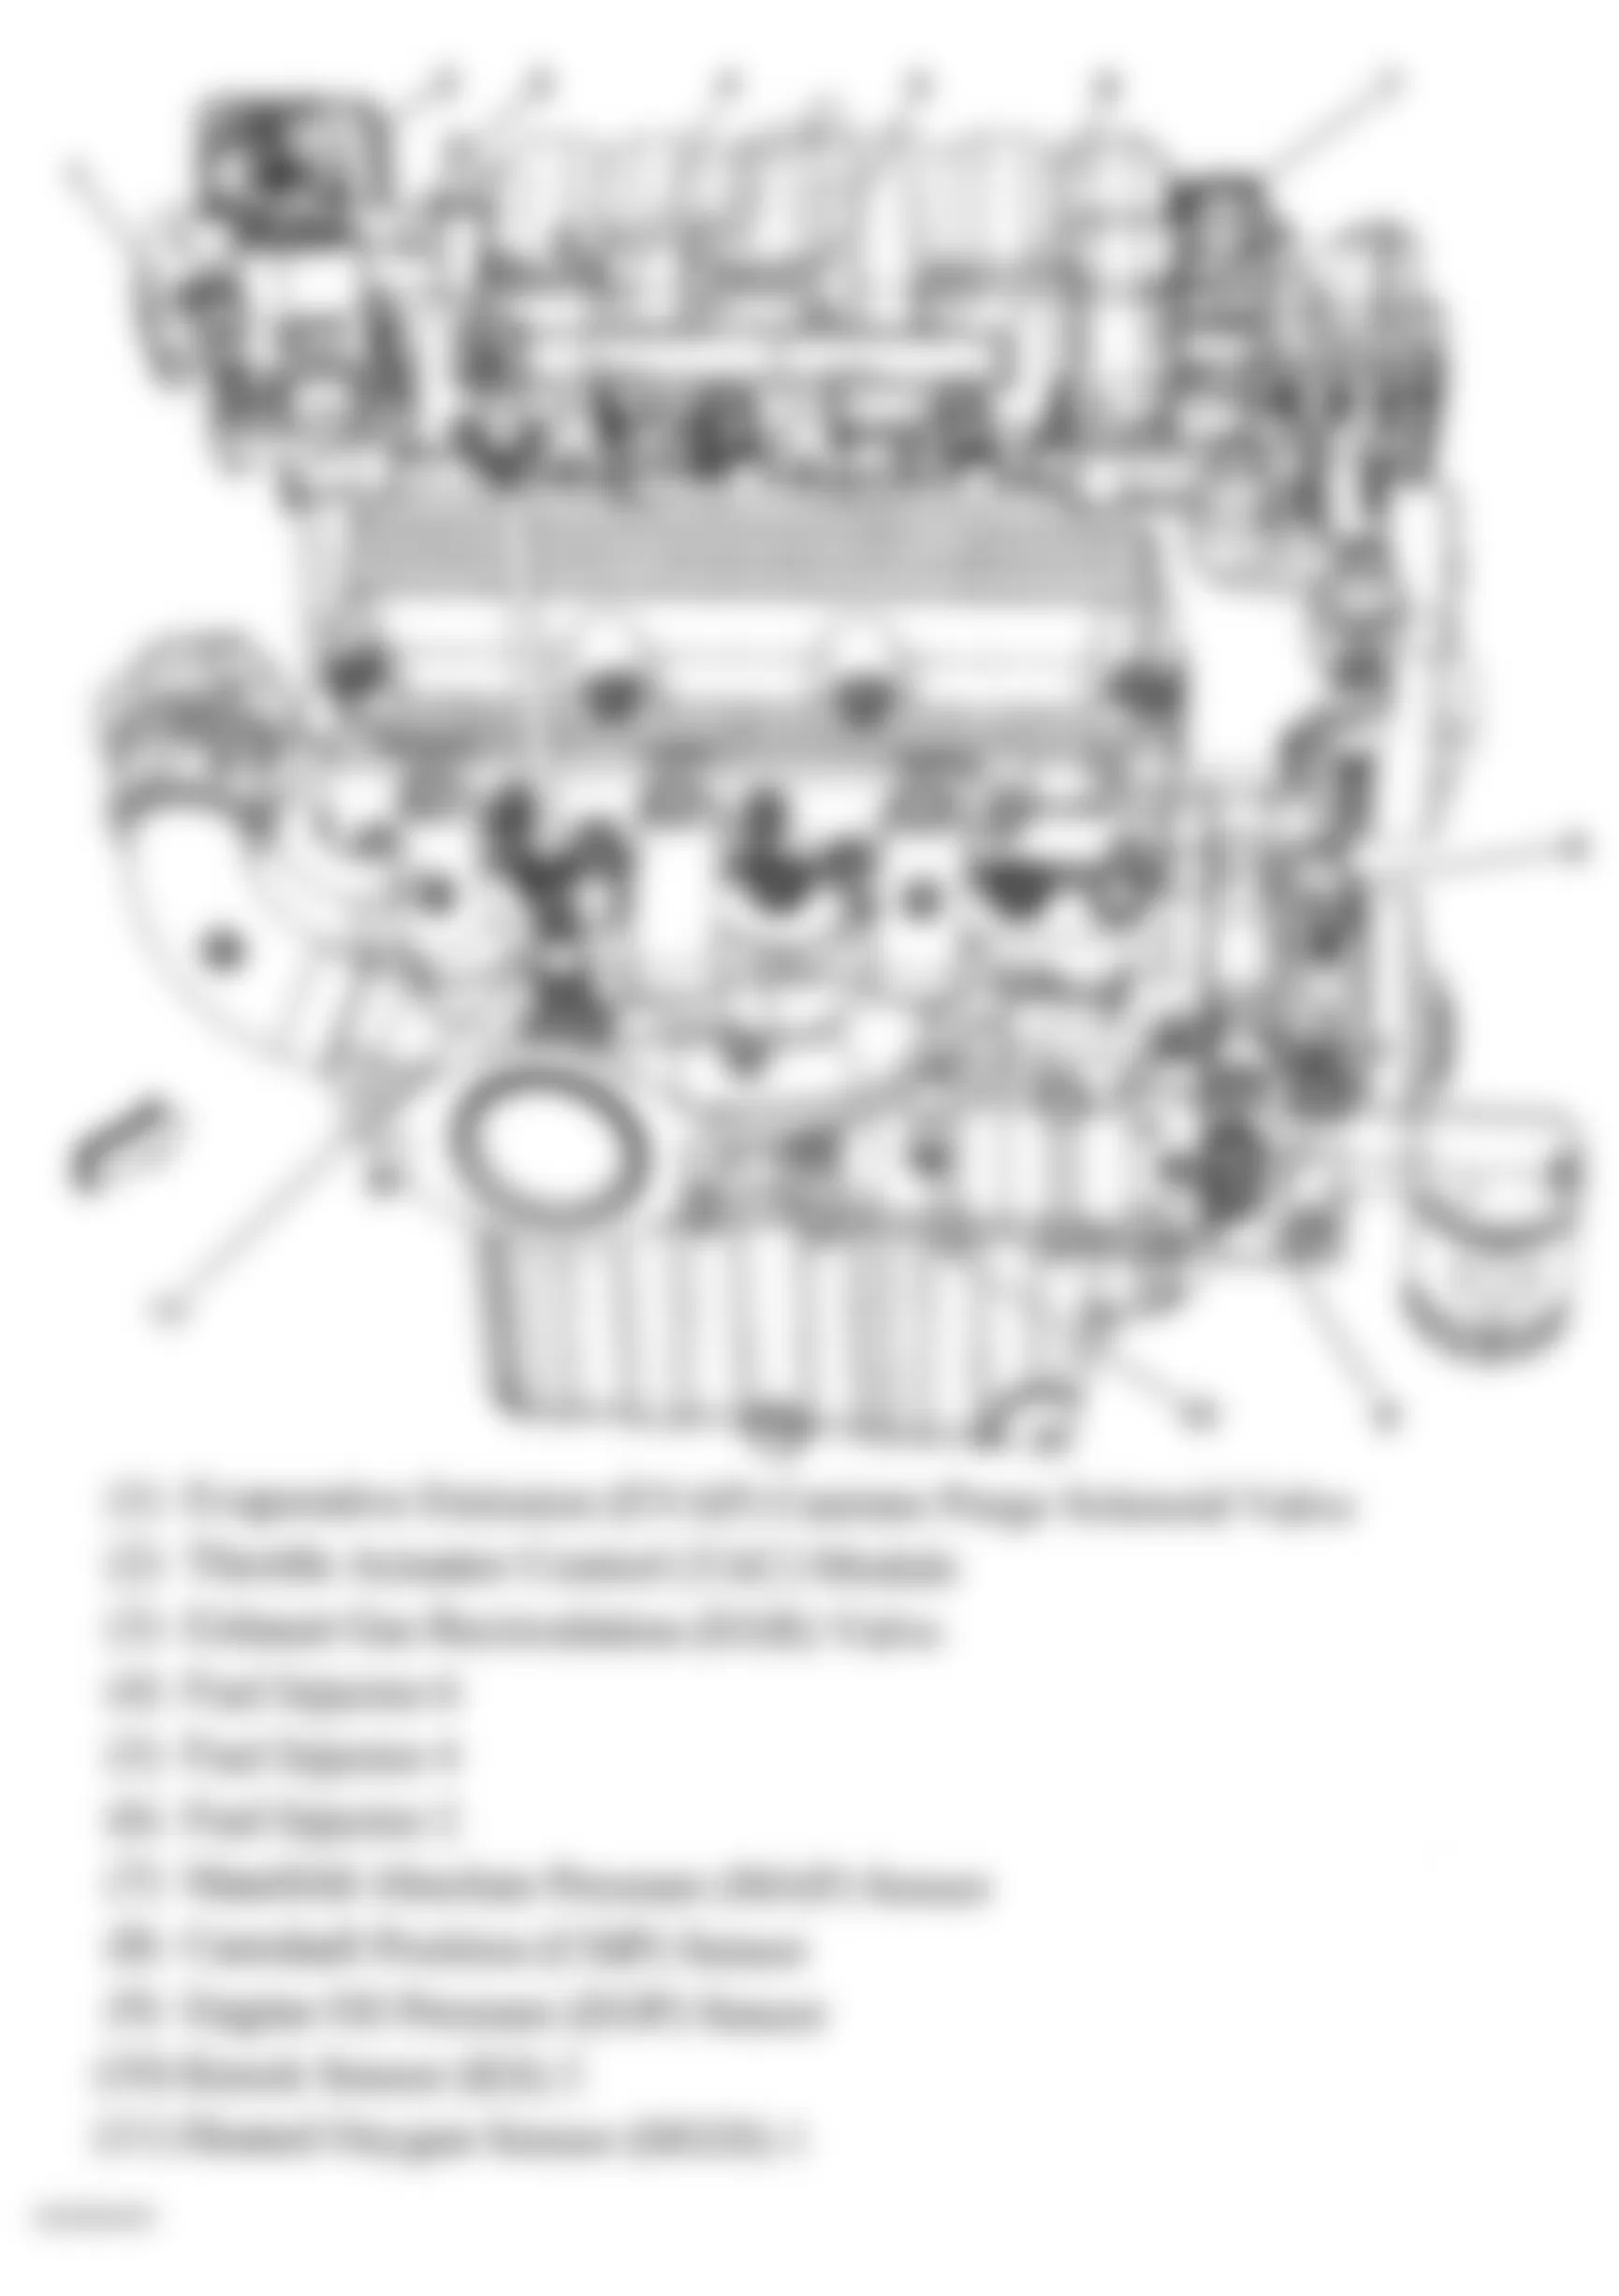 Buick LaCrosse CX 2006 - Component Locations -  Right Side Of Engine (3.8L)